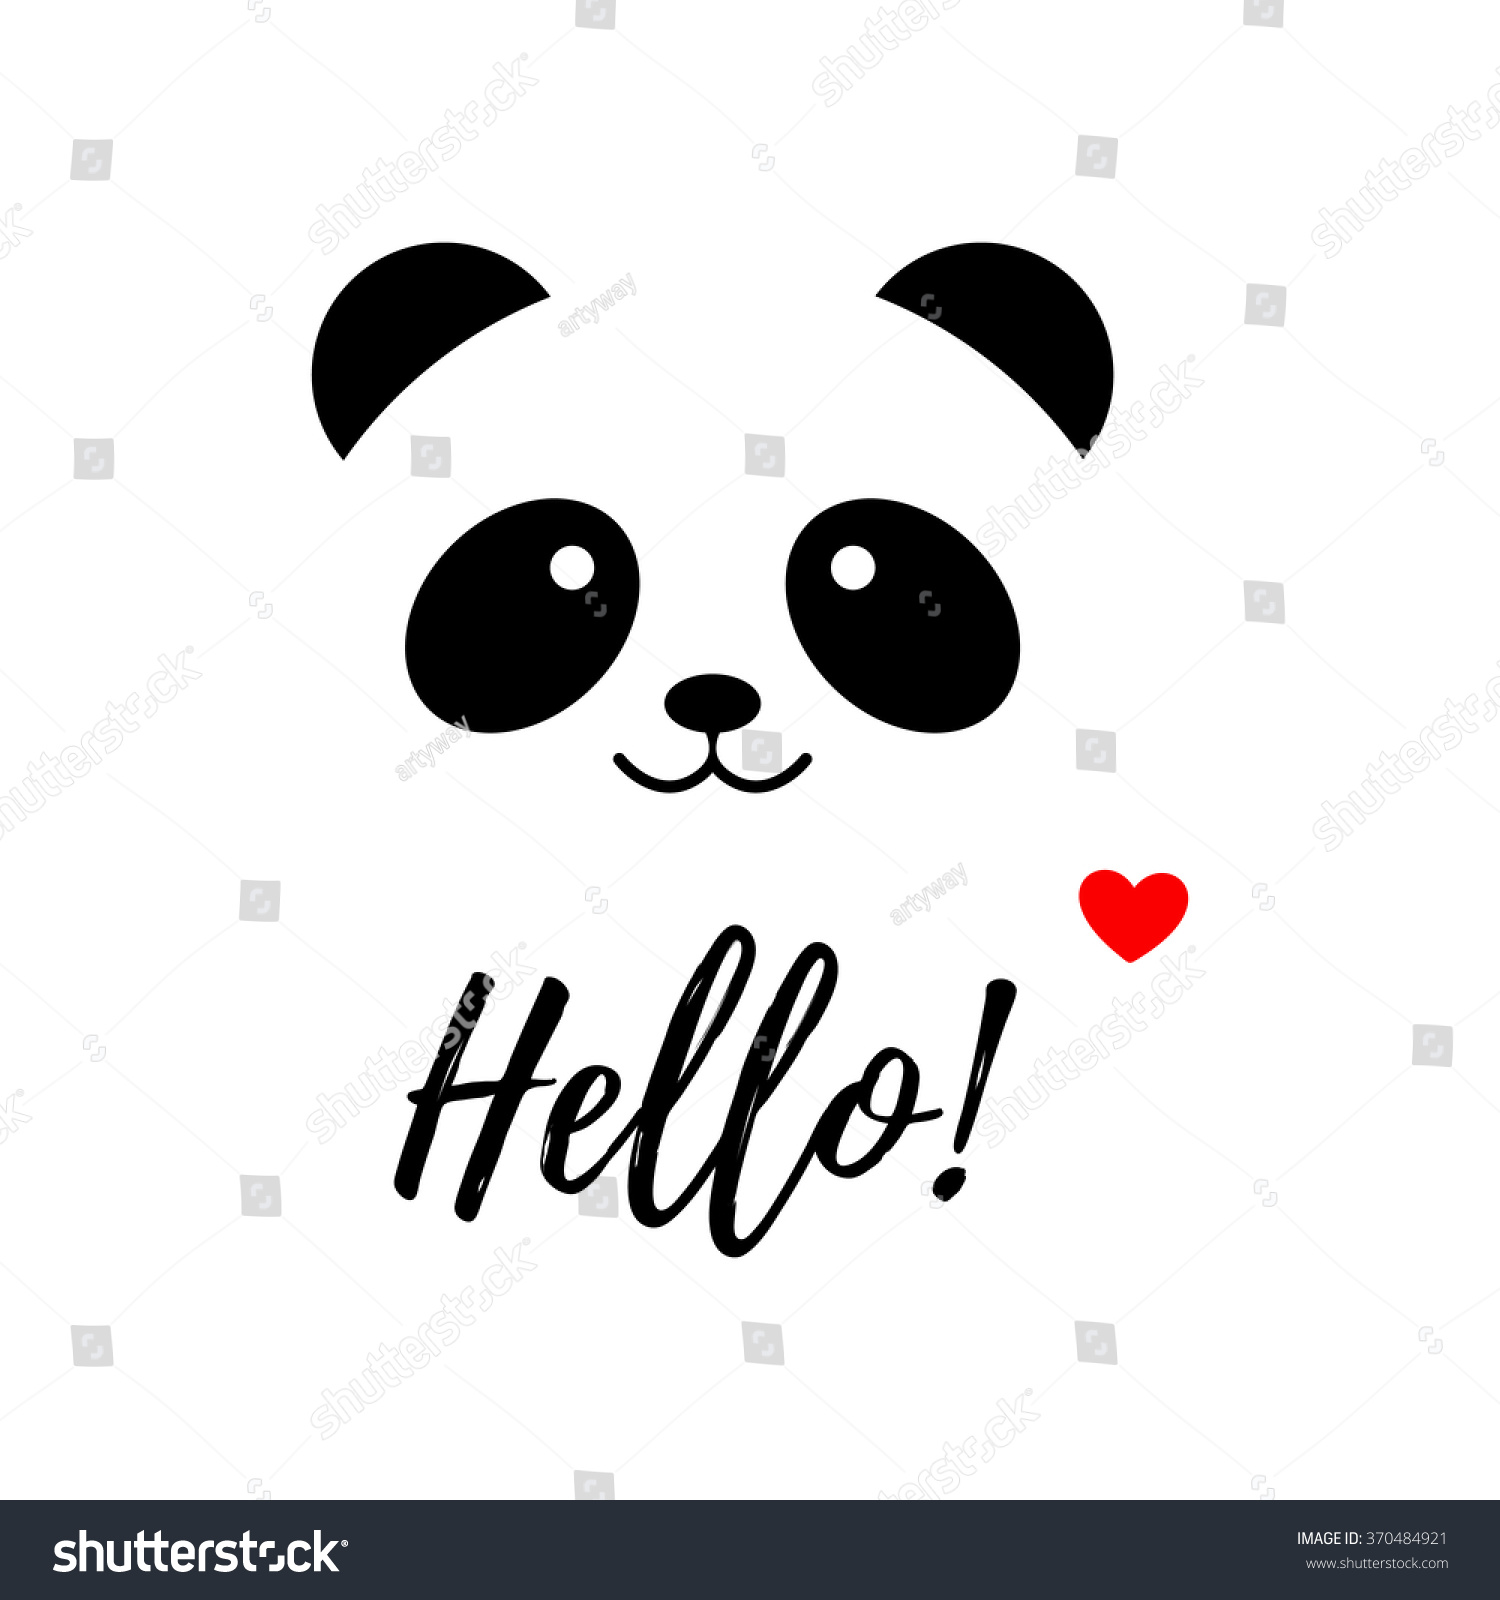 SVG of Isolated vector panda logo. Animal illustration. Hello icon. Smiling bear image. White background. Greeting card for St. Valentines Day. Love. Romantic illustration. svg